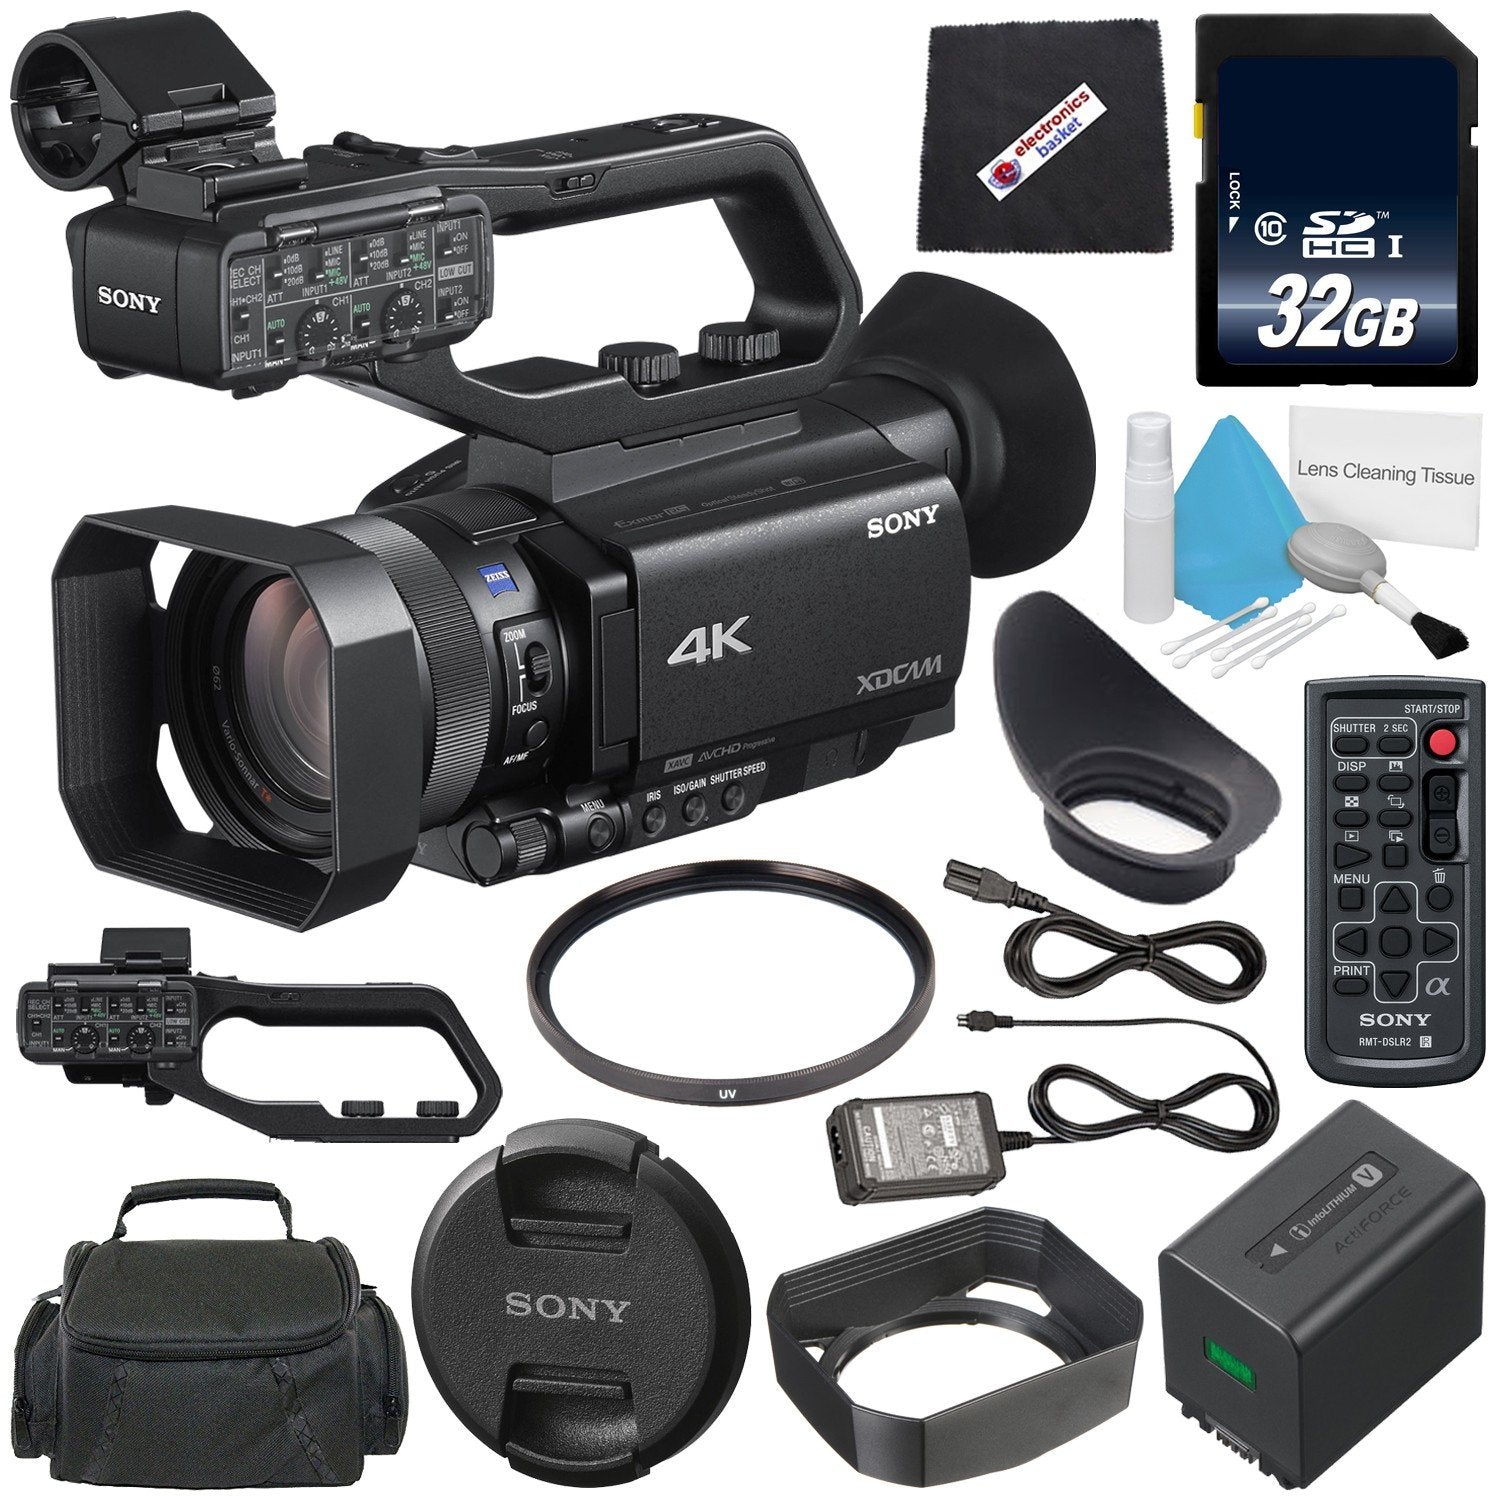 Sony PXW-Z90V 4K HDR XDCAM with Fast Hybrid AF + 32GB SDHC Class 10 Memory Card + 62mm UV Filter + Carrying Case + Microfiber Cleaning Cloth + Deluxe Cleaning Kit Bundle International Version